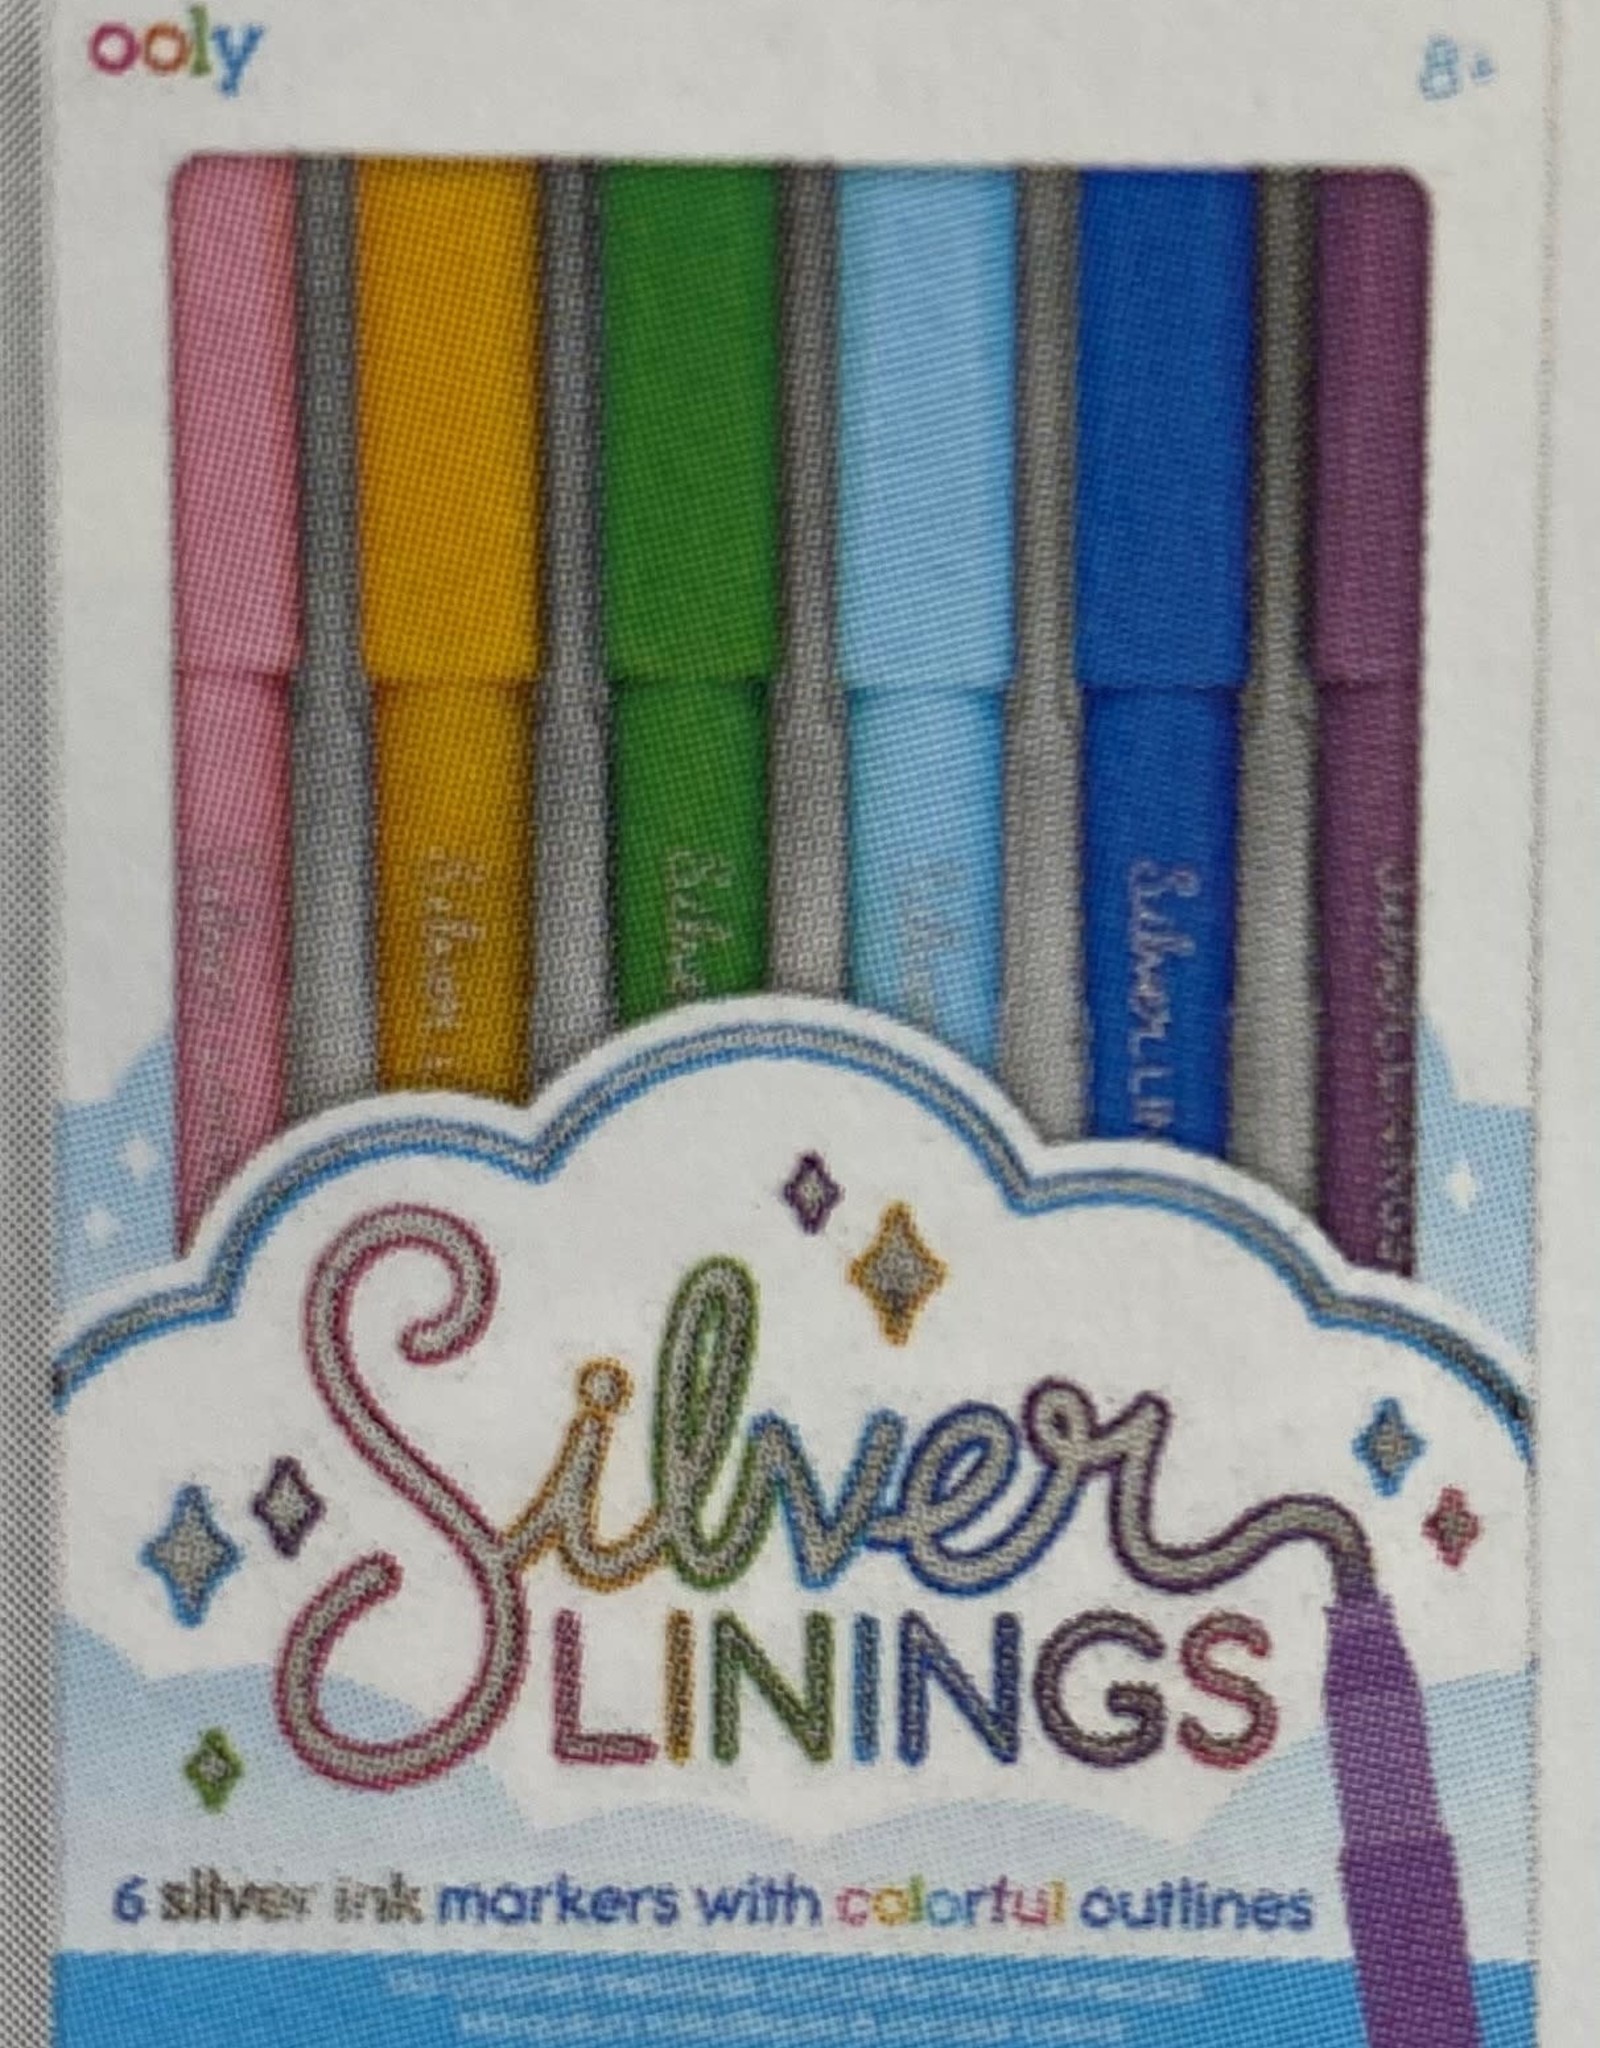 Ooly - Silver Linings Outline Markers - Set of 6